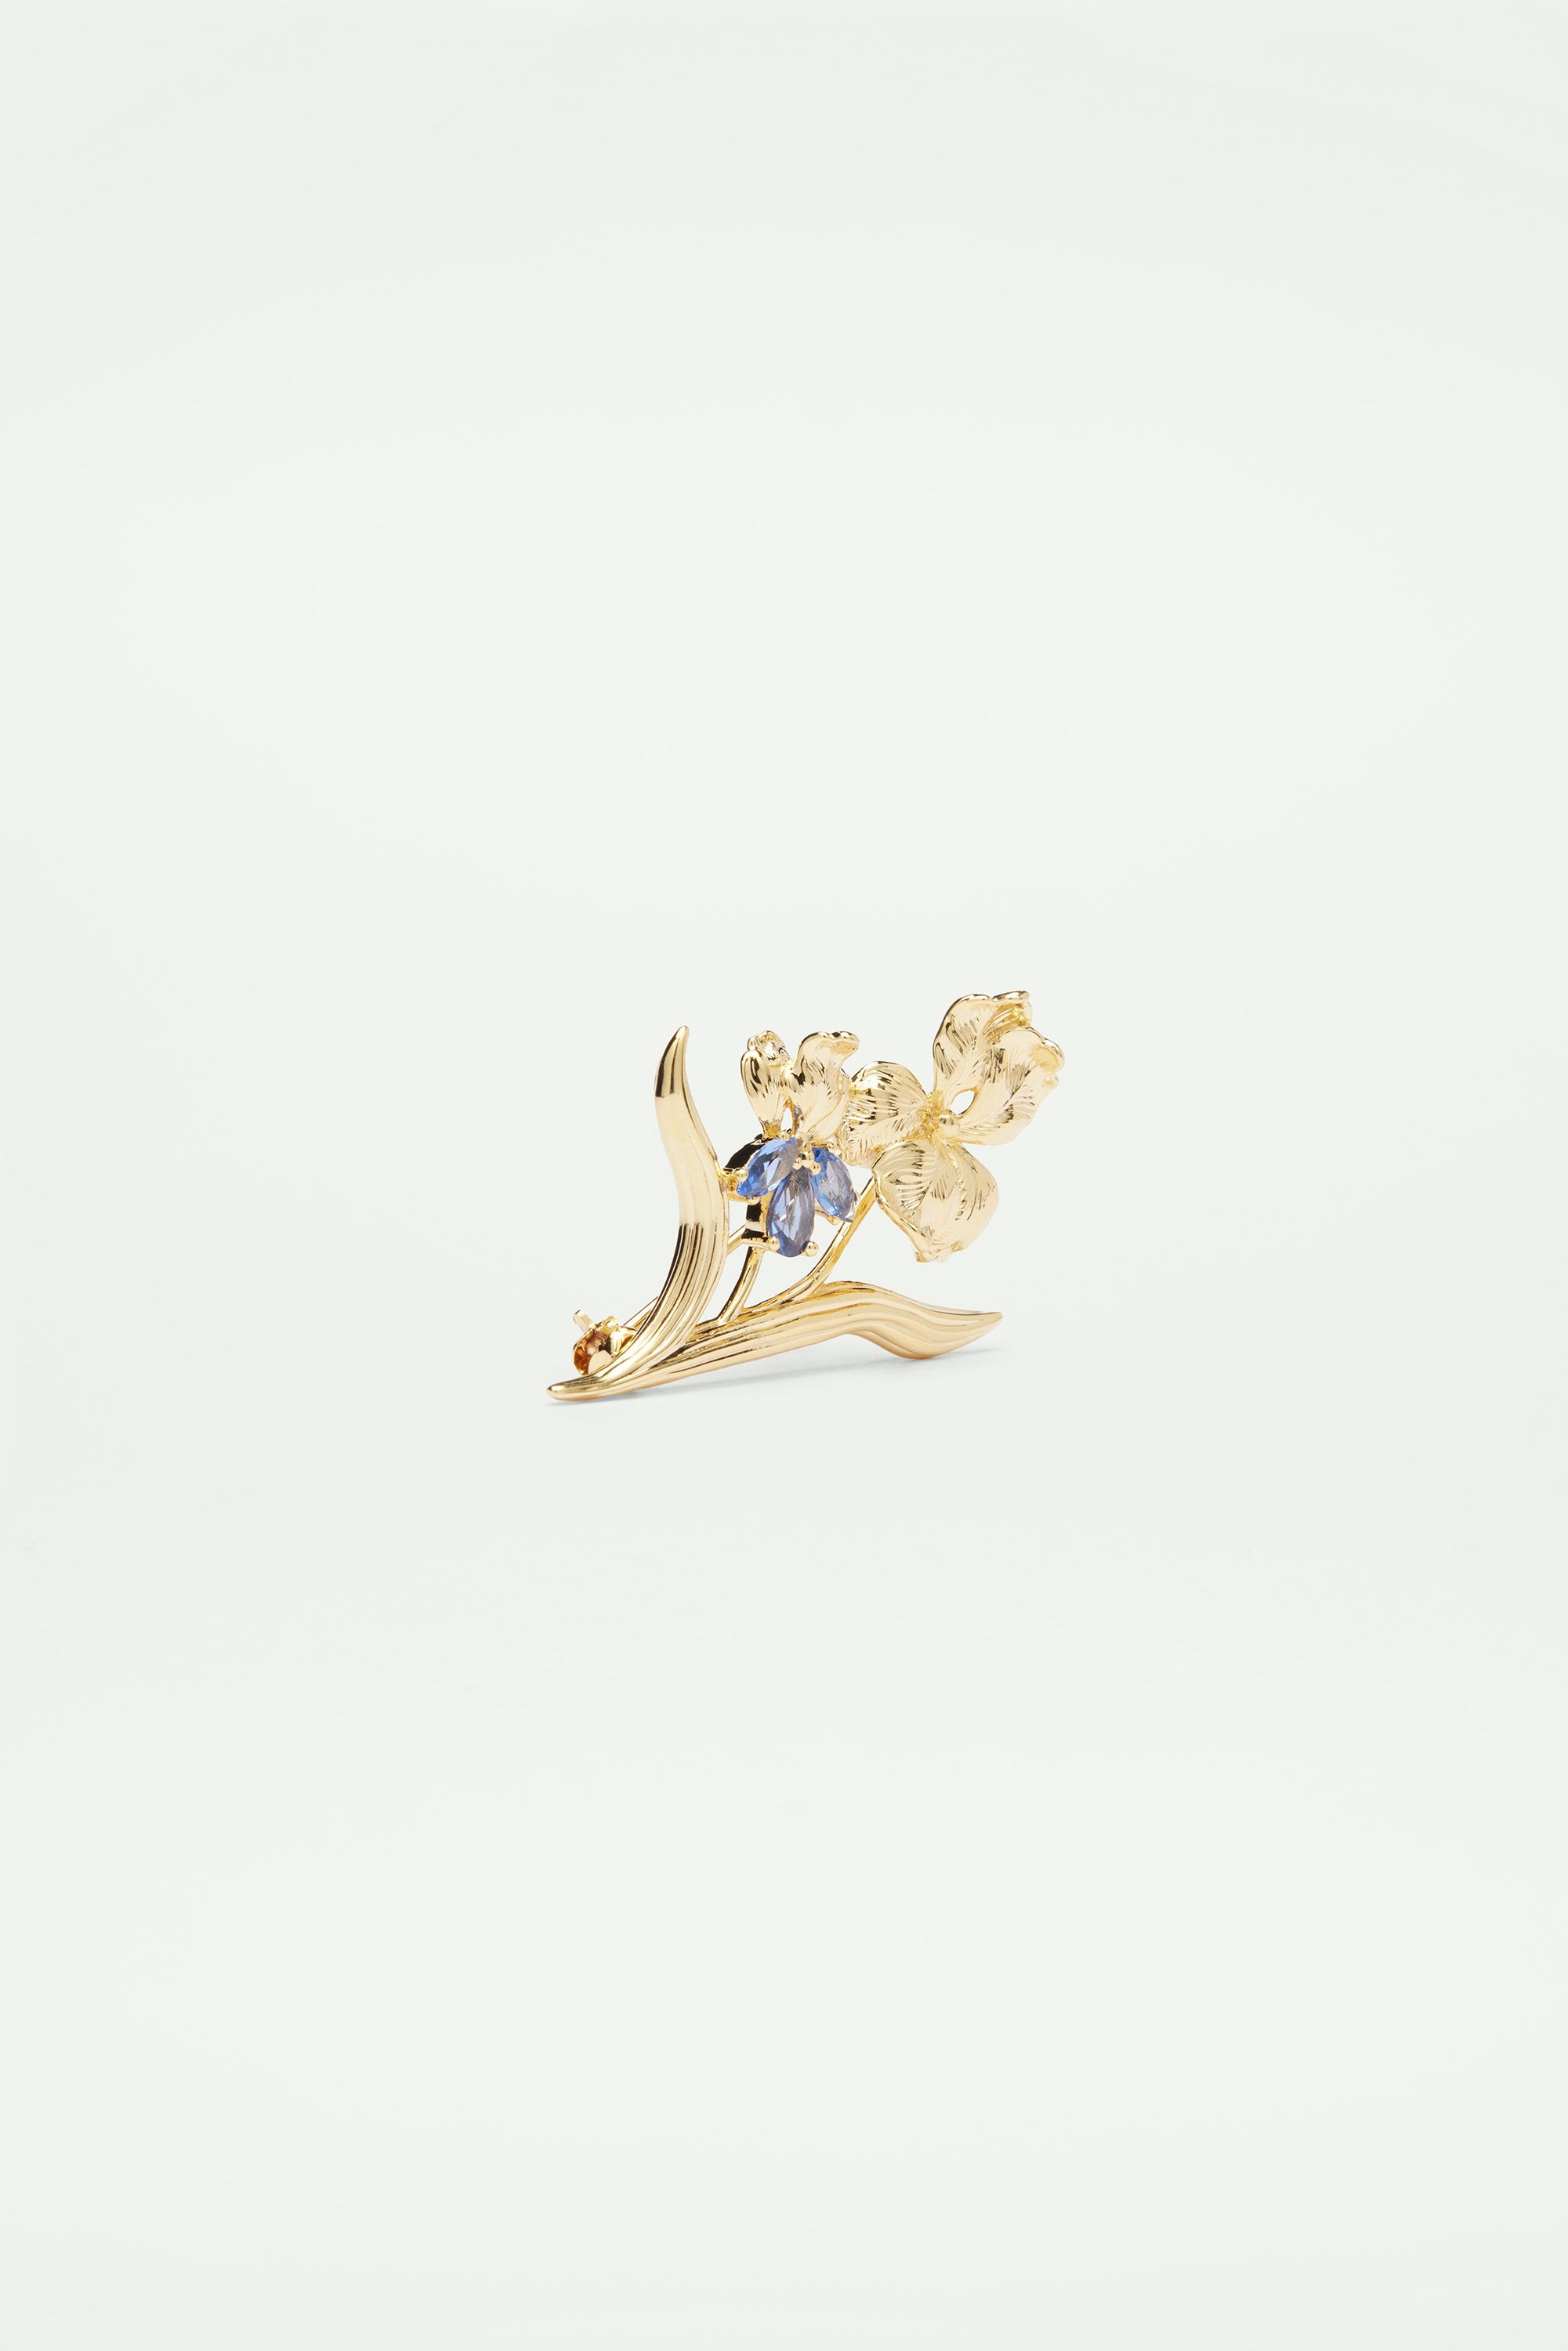 Gold iris and blue crystal brooch